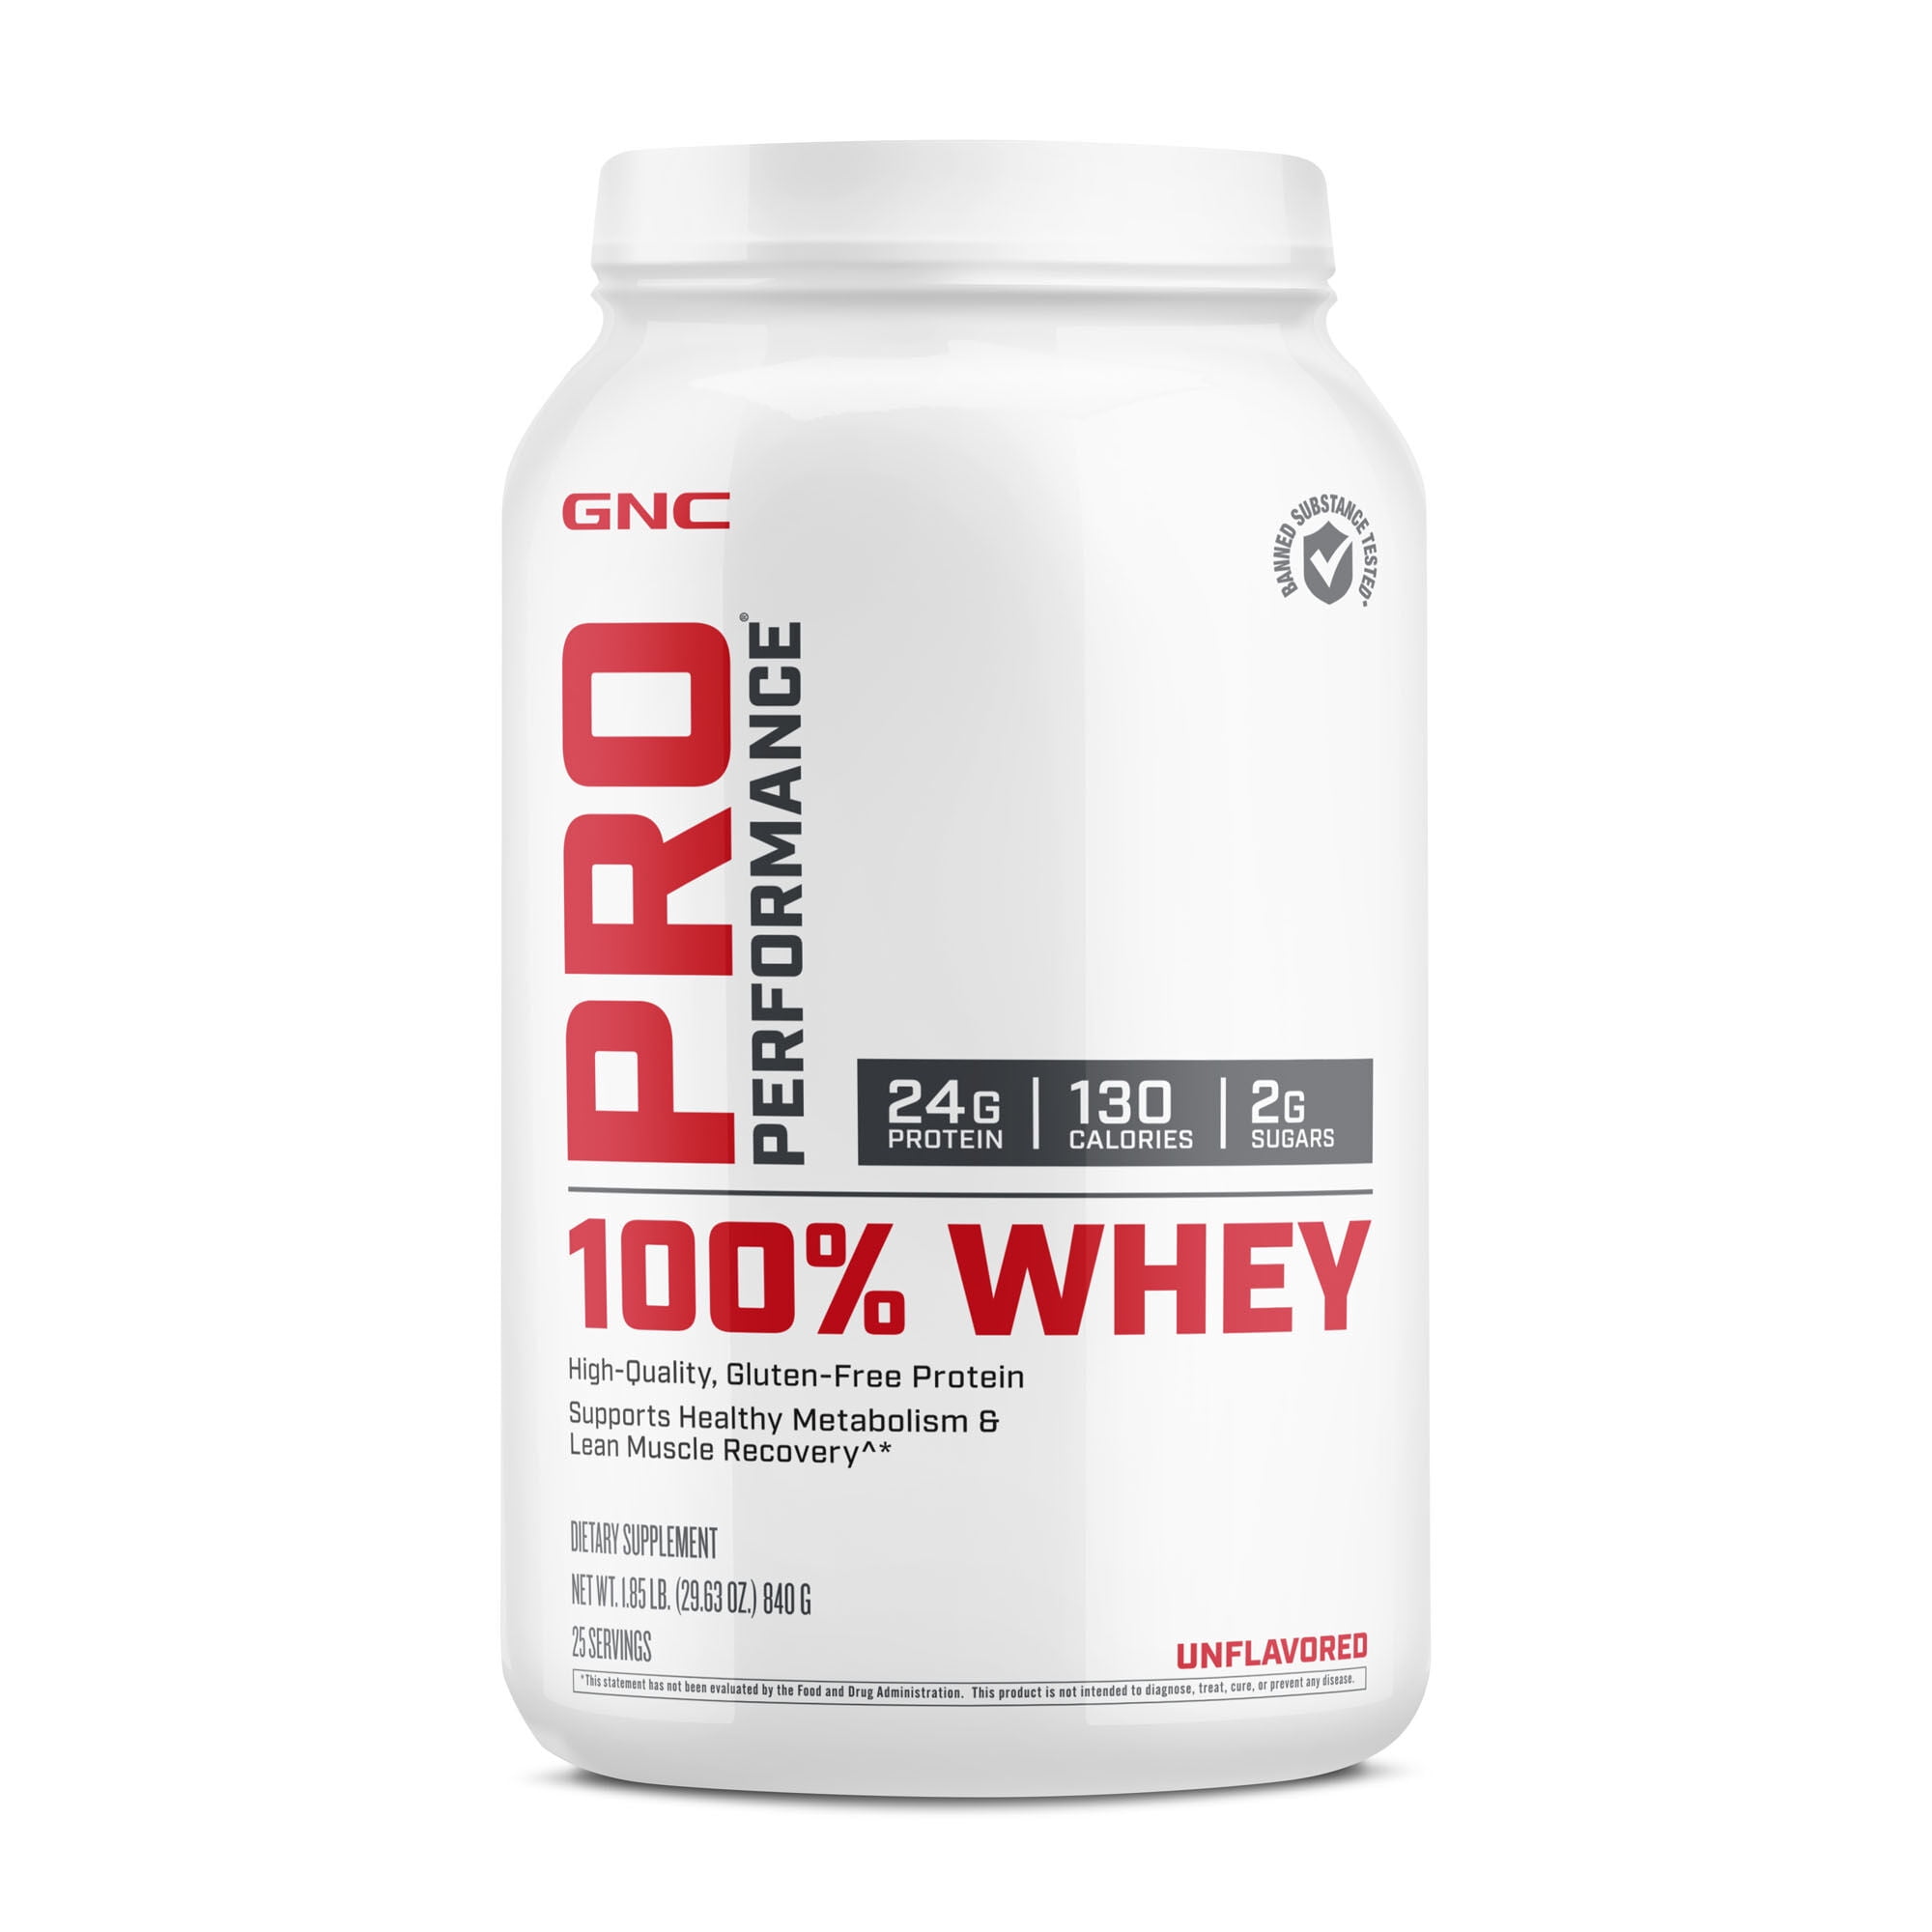 WHEY30 Performance Whey Protein Powder with 30g of Protein per Scoop to  Build Lean Muscle, Recover Quickly, and Preserve Gains for Stronger Body  and More Muscle Mass, Force Factor, 3 Pounds 